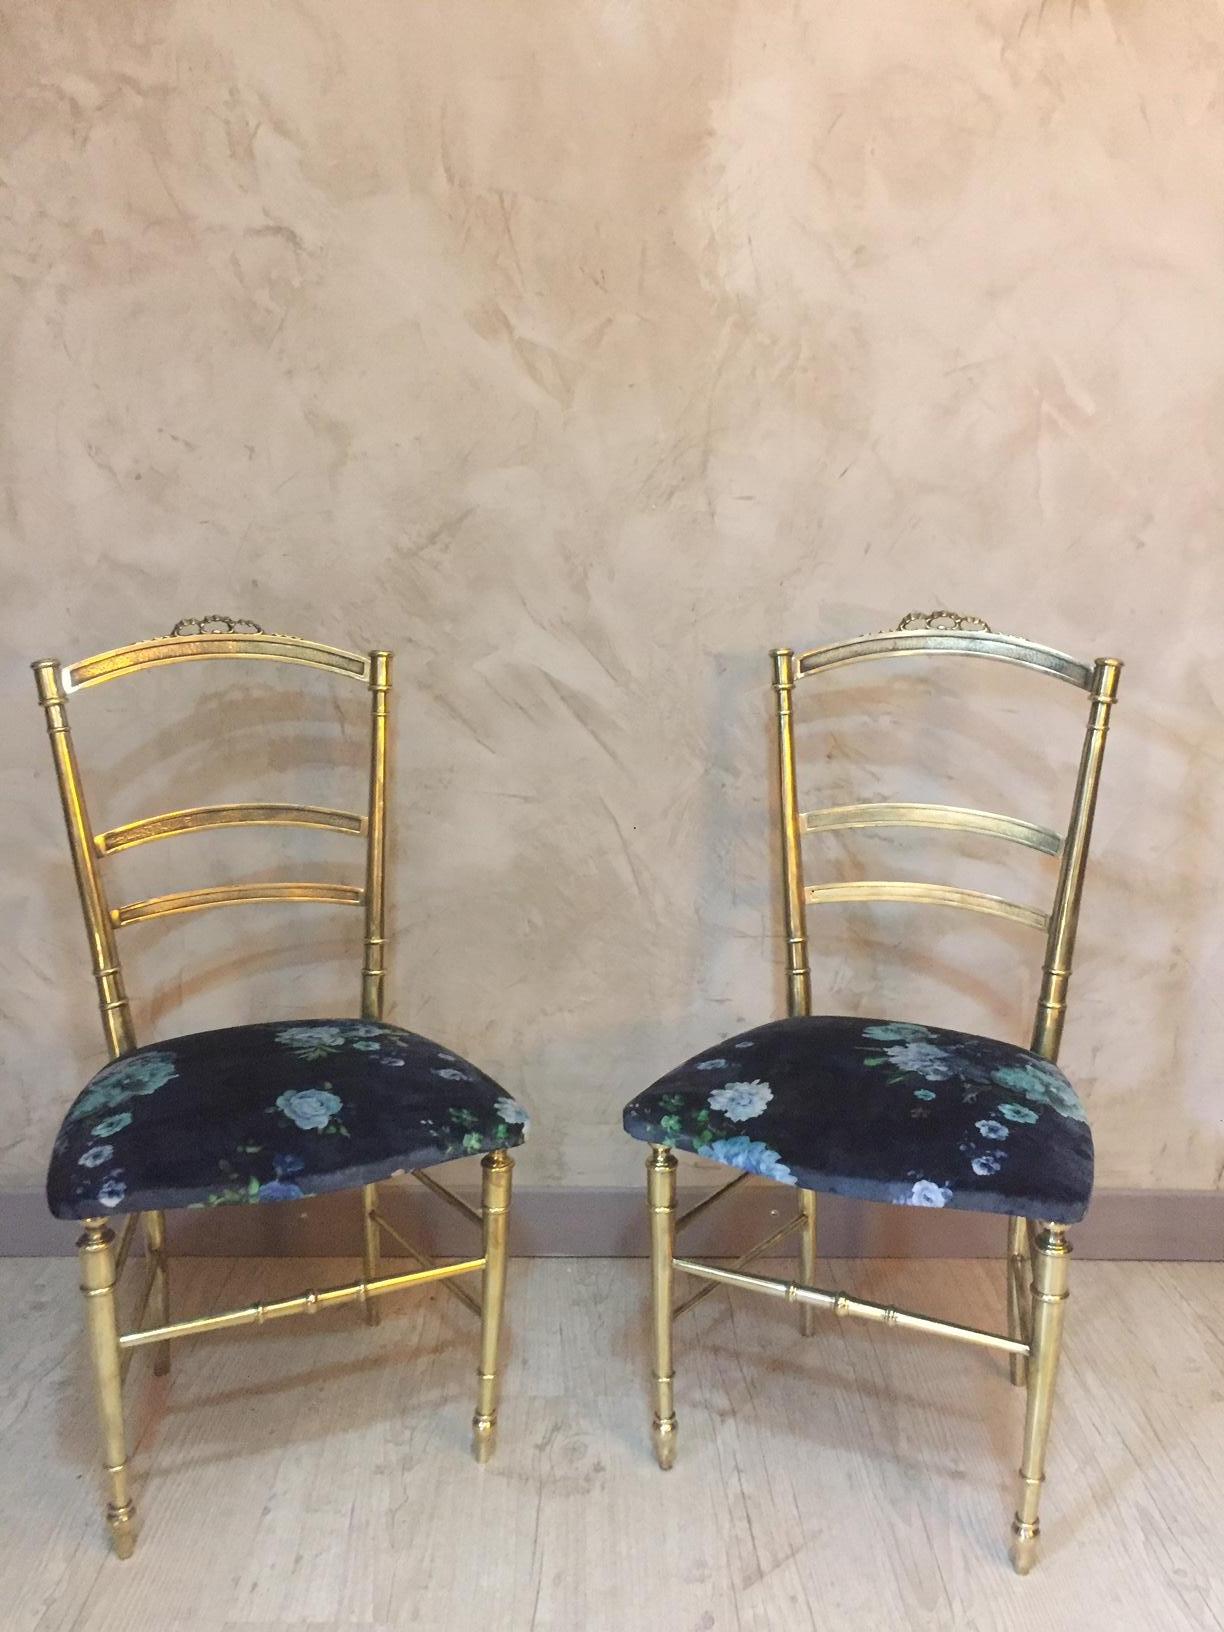 20th century, French pair of Louis XVI style gilded bronze chairs from the 1930s.
Seating completely upholstered with a flower velvelt fabric.
Very high quality, the chairs are heavy. The seating is fixed by screws. So if you want to change the